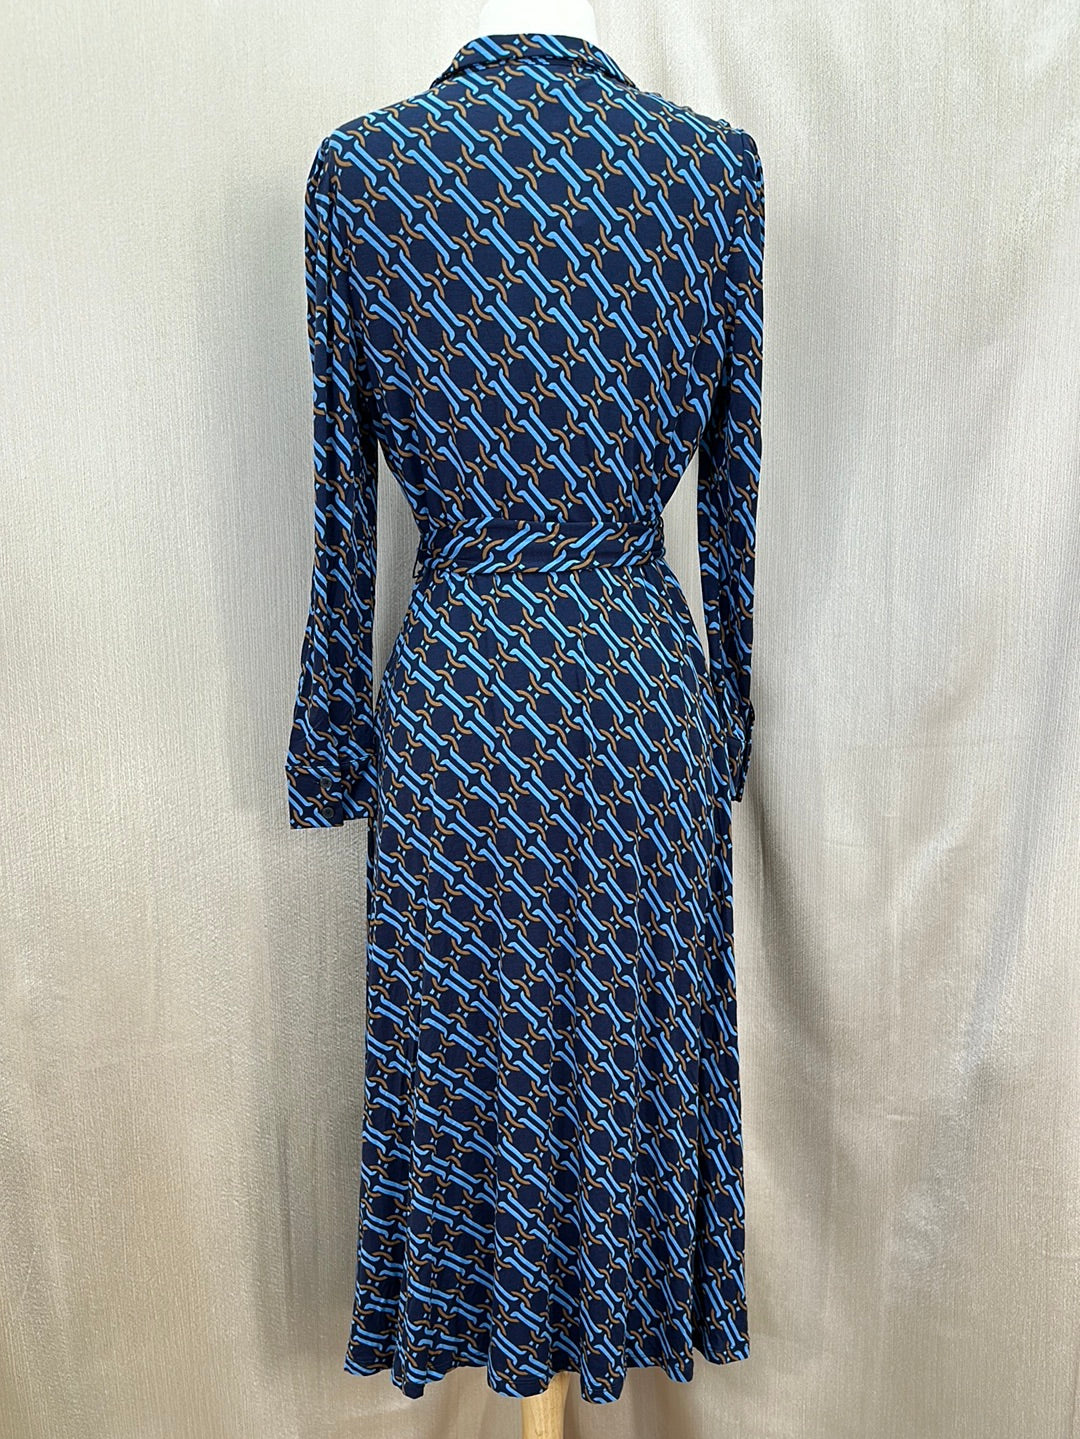 NWT - BODEN navy print Viscose Jersey Belted 3/4 Sleeve Midi Dress - US 10P